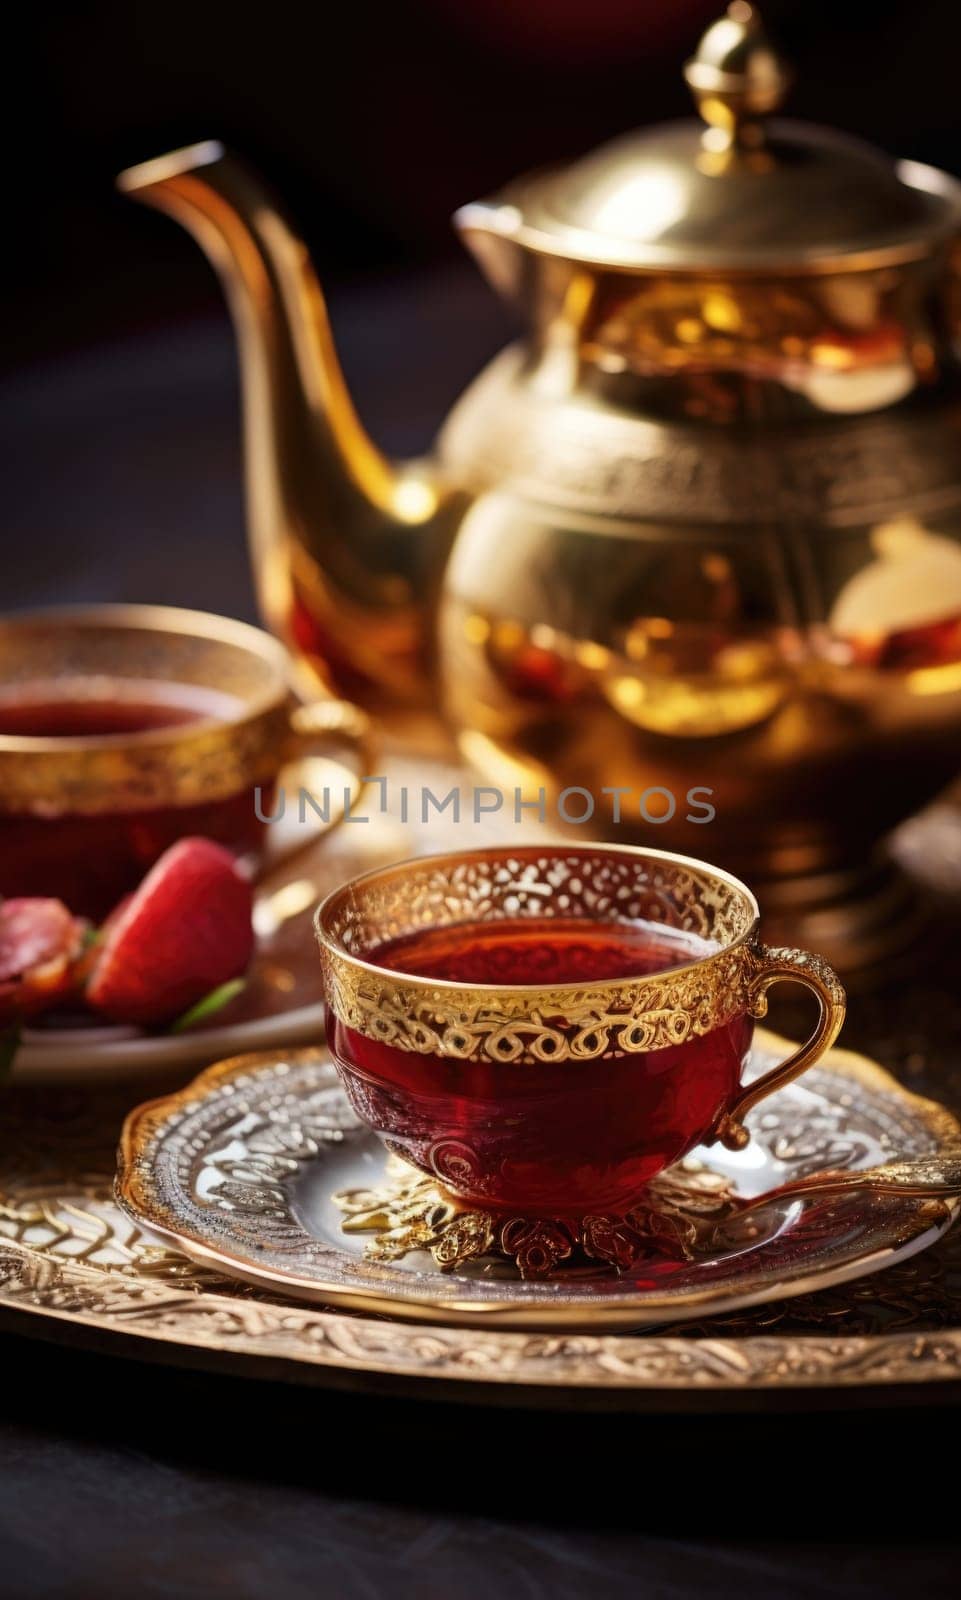 A gold tea pot and cup on a plate